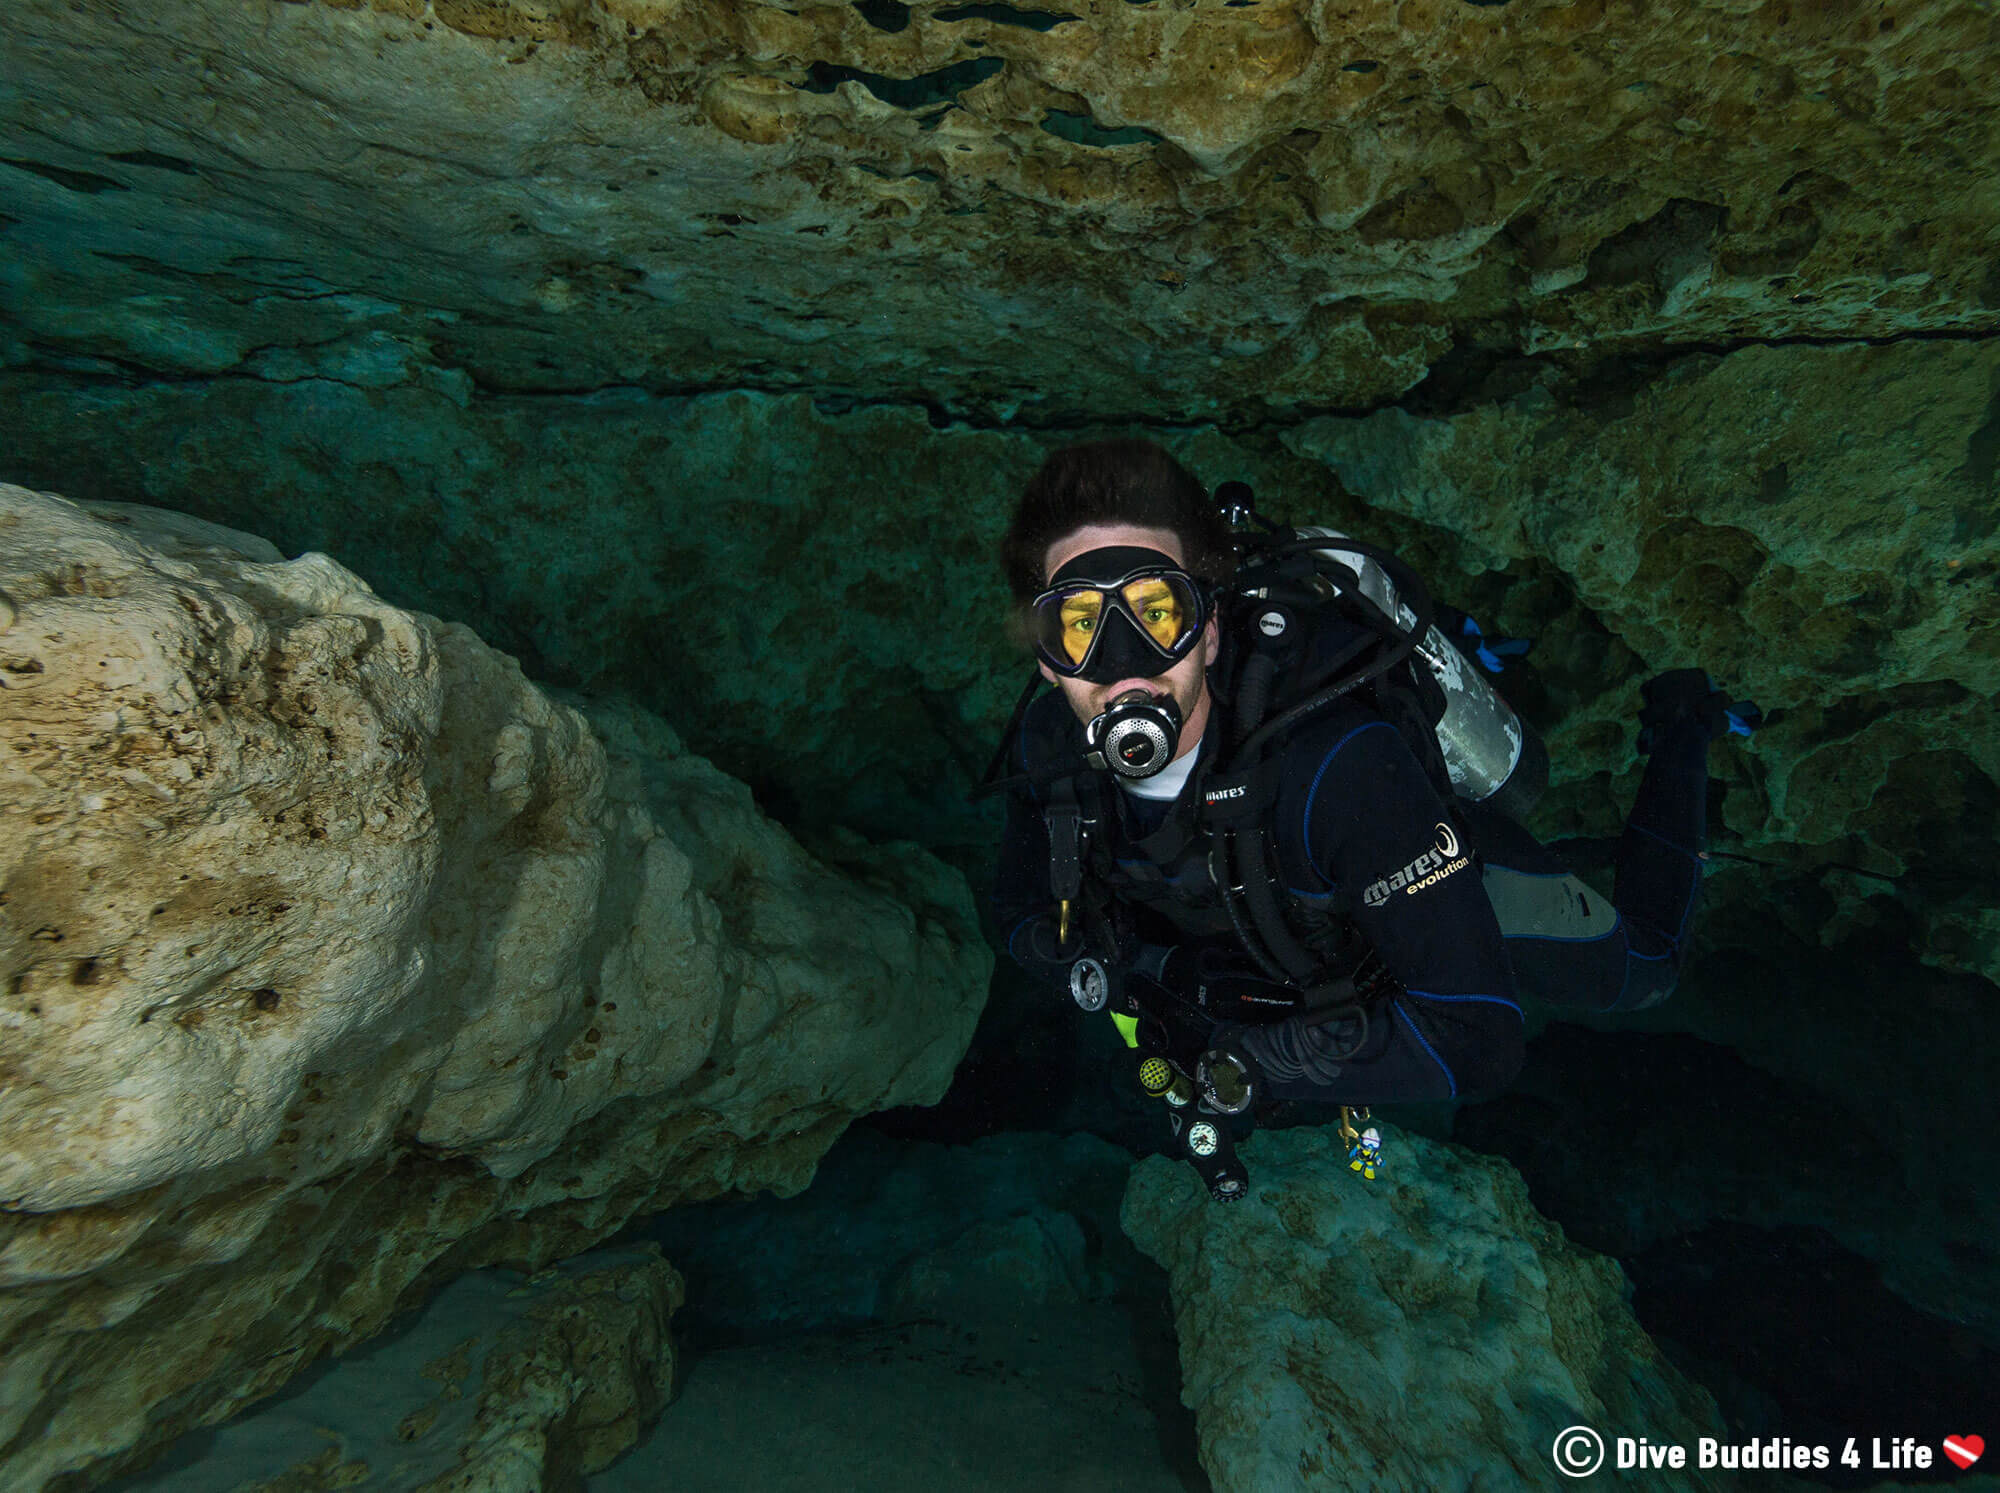 Joey Scuba Diving In The Funky Rocks Of Ginnie Ballroom Cave